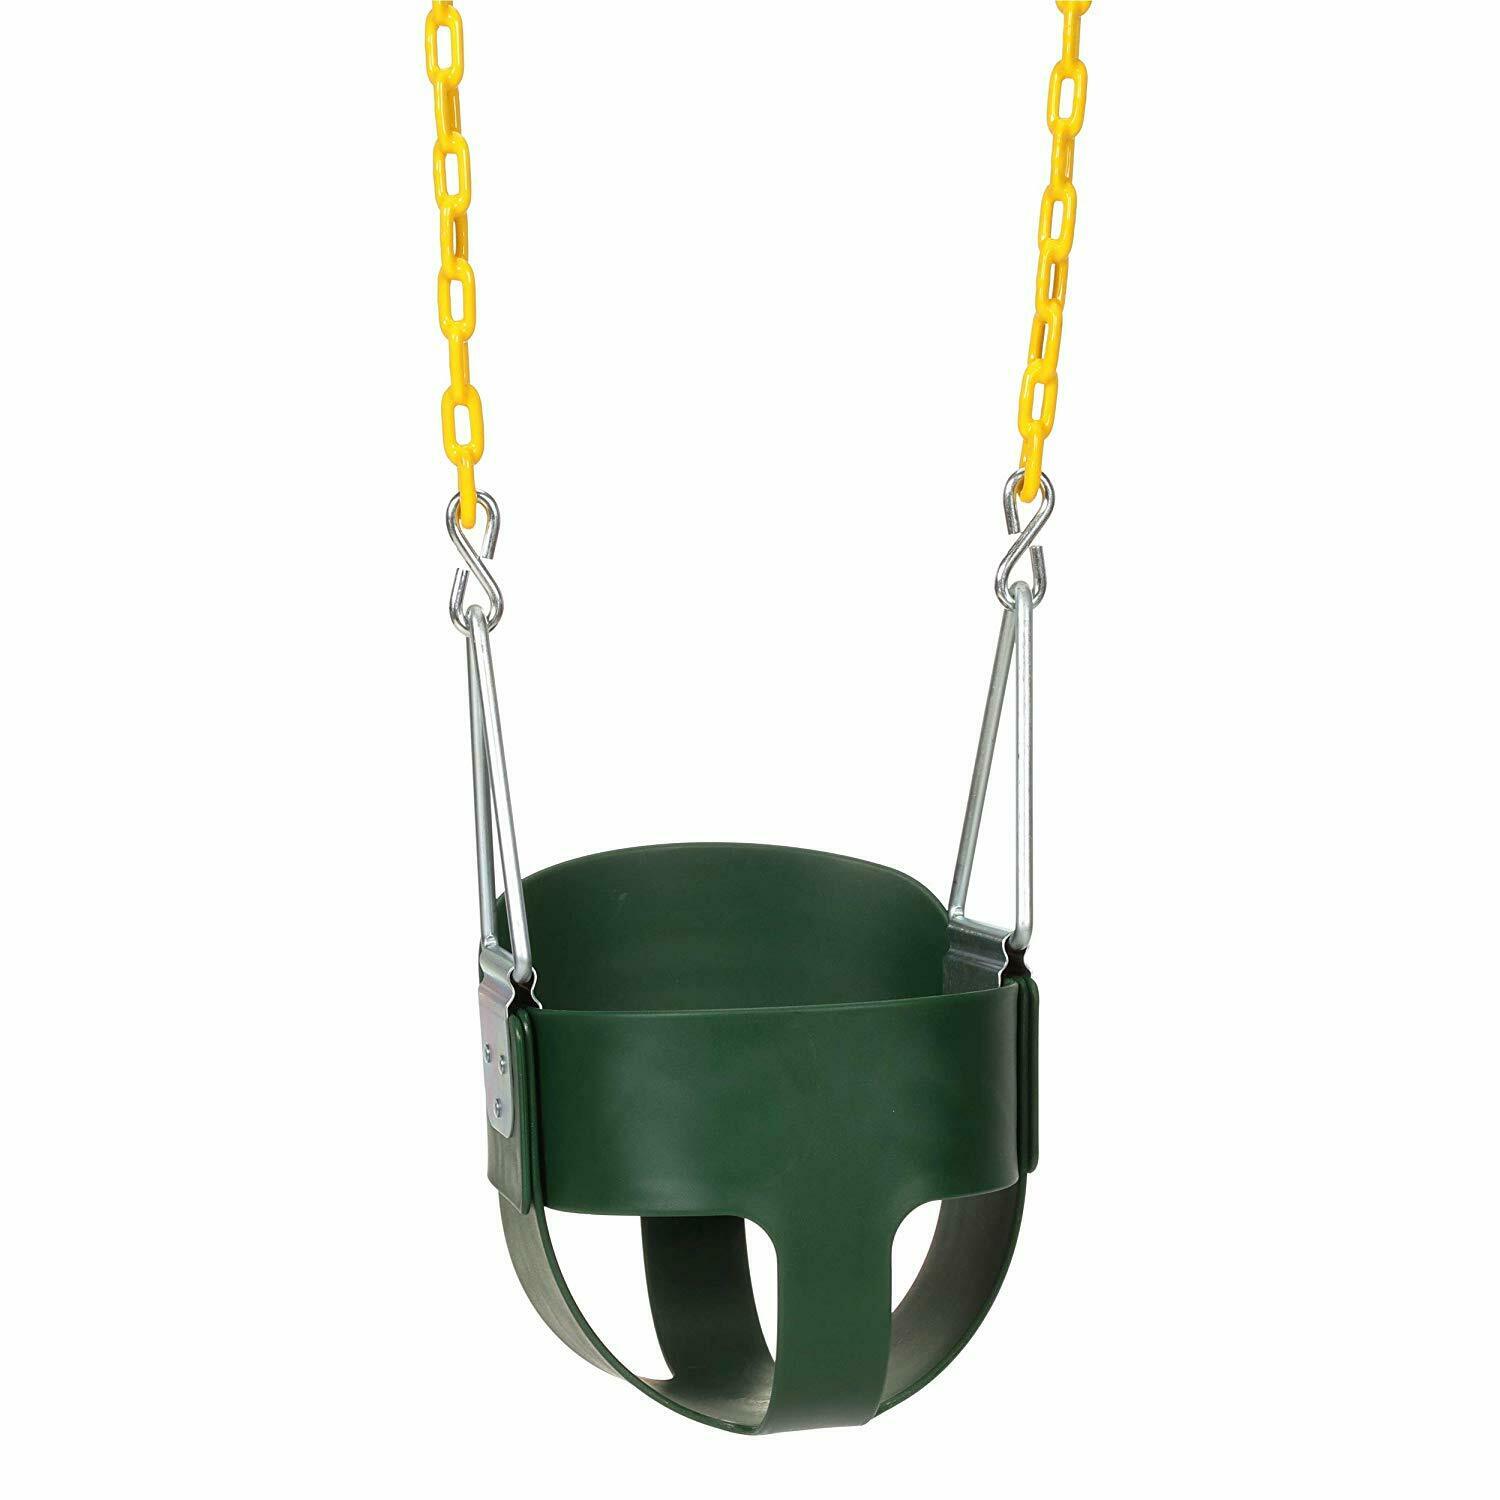 High Back Full Bucket Infant Swing Seat - Coated Chains - Fully Assembled